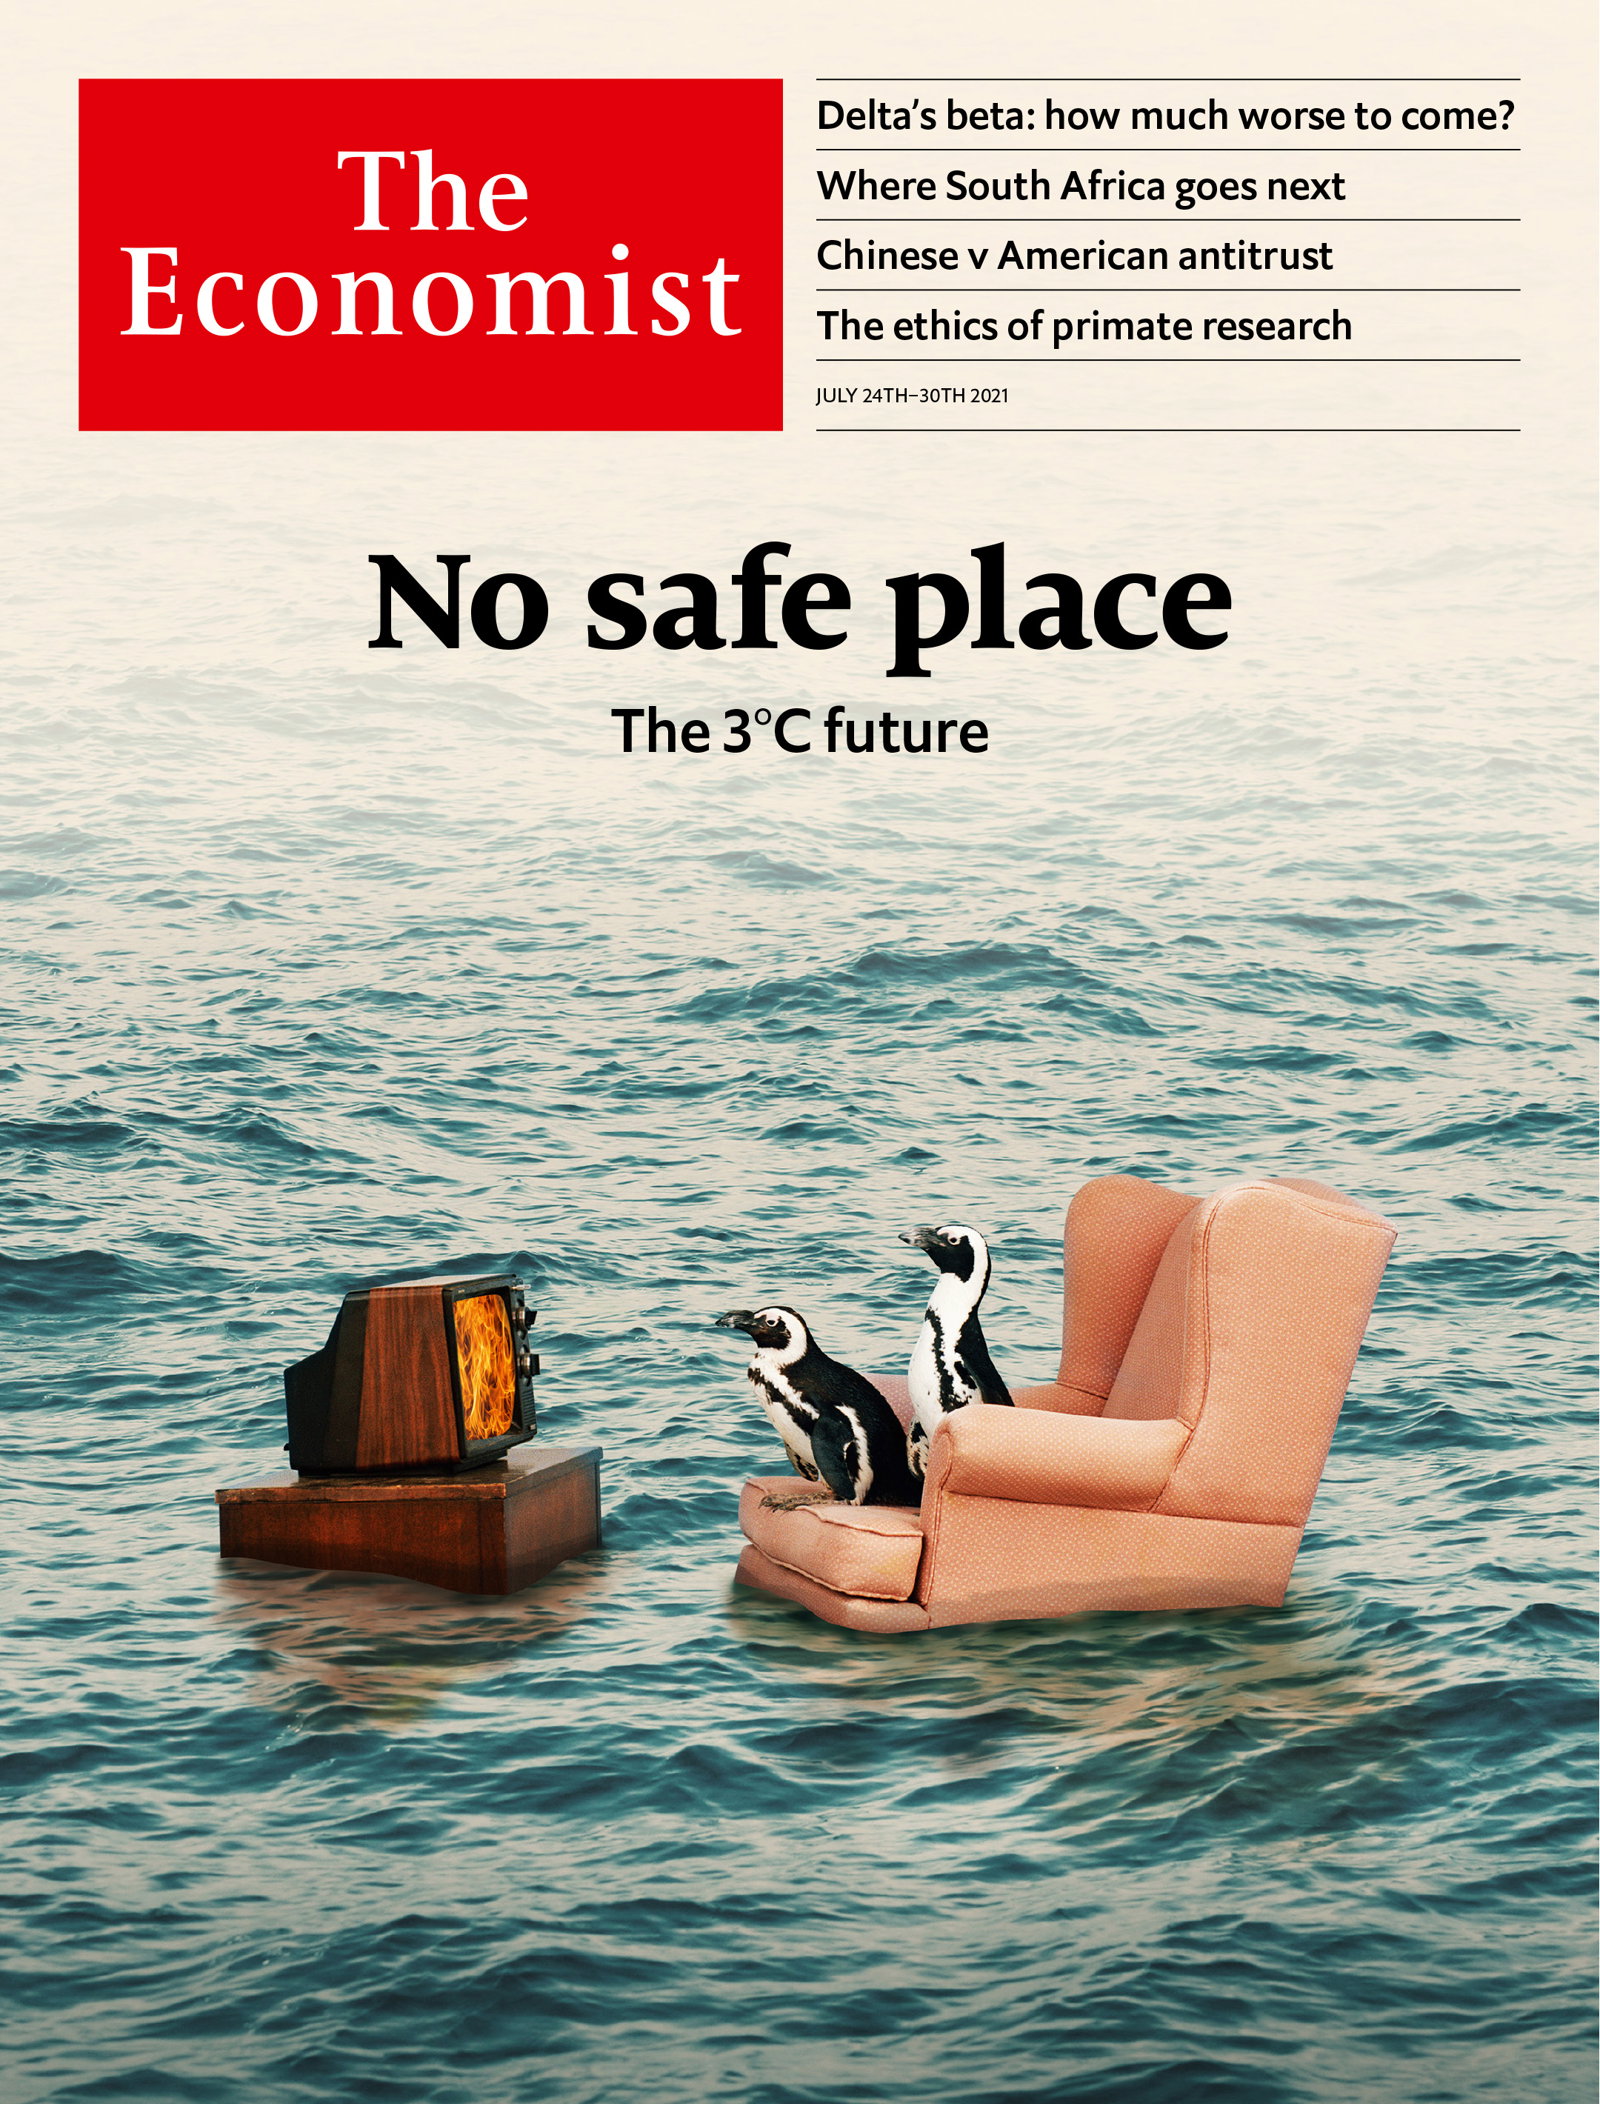 The Economist In a 3C world, there is no safe place Milled